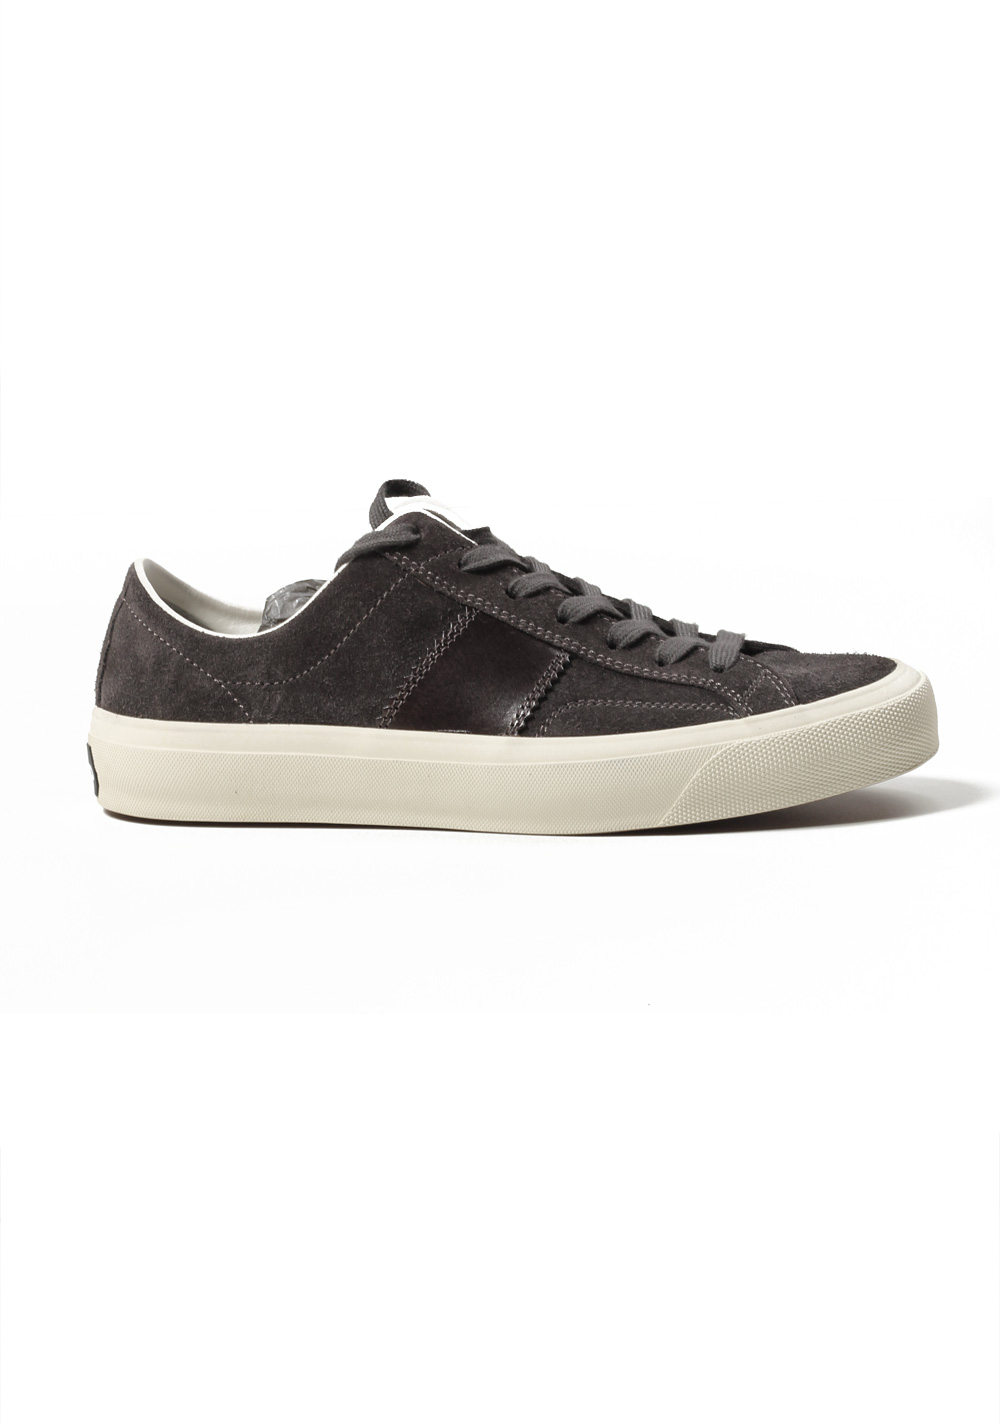 TOM FORD Cambridge Lace Up Dark Gray Suede Sneaker Shoes Size 7,5 UK / 8,5 U.S. | Costume Limité